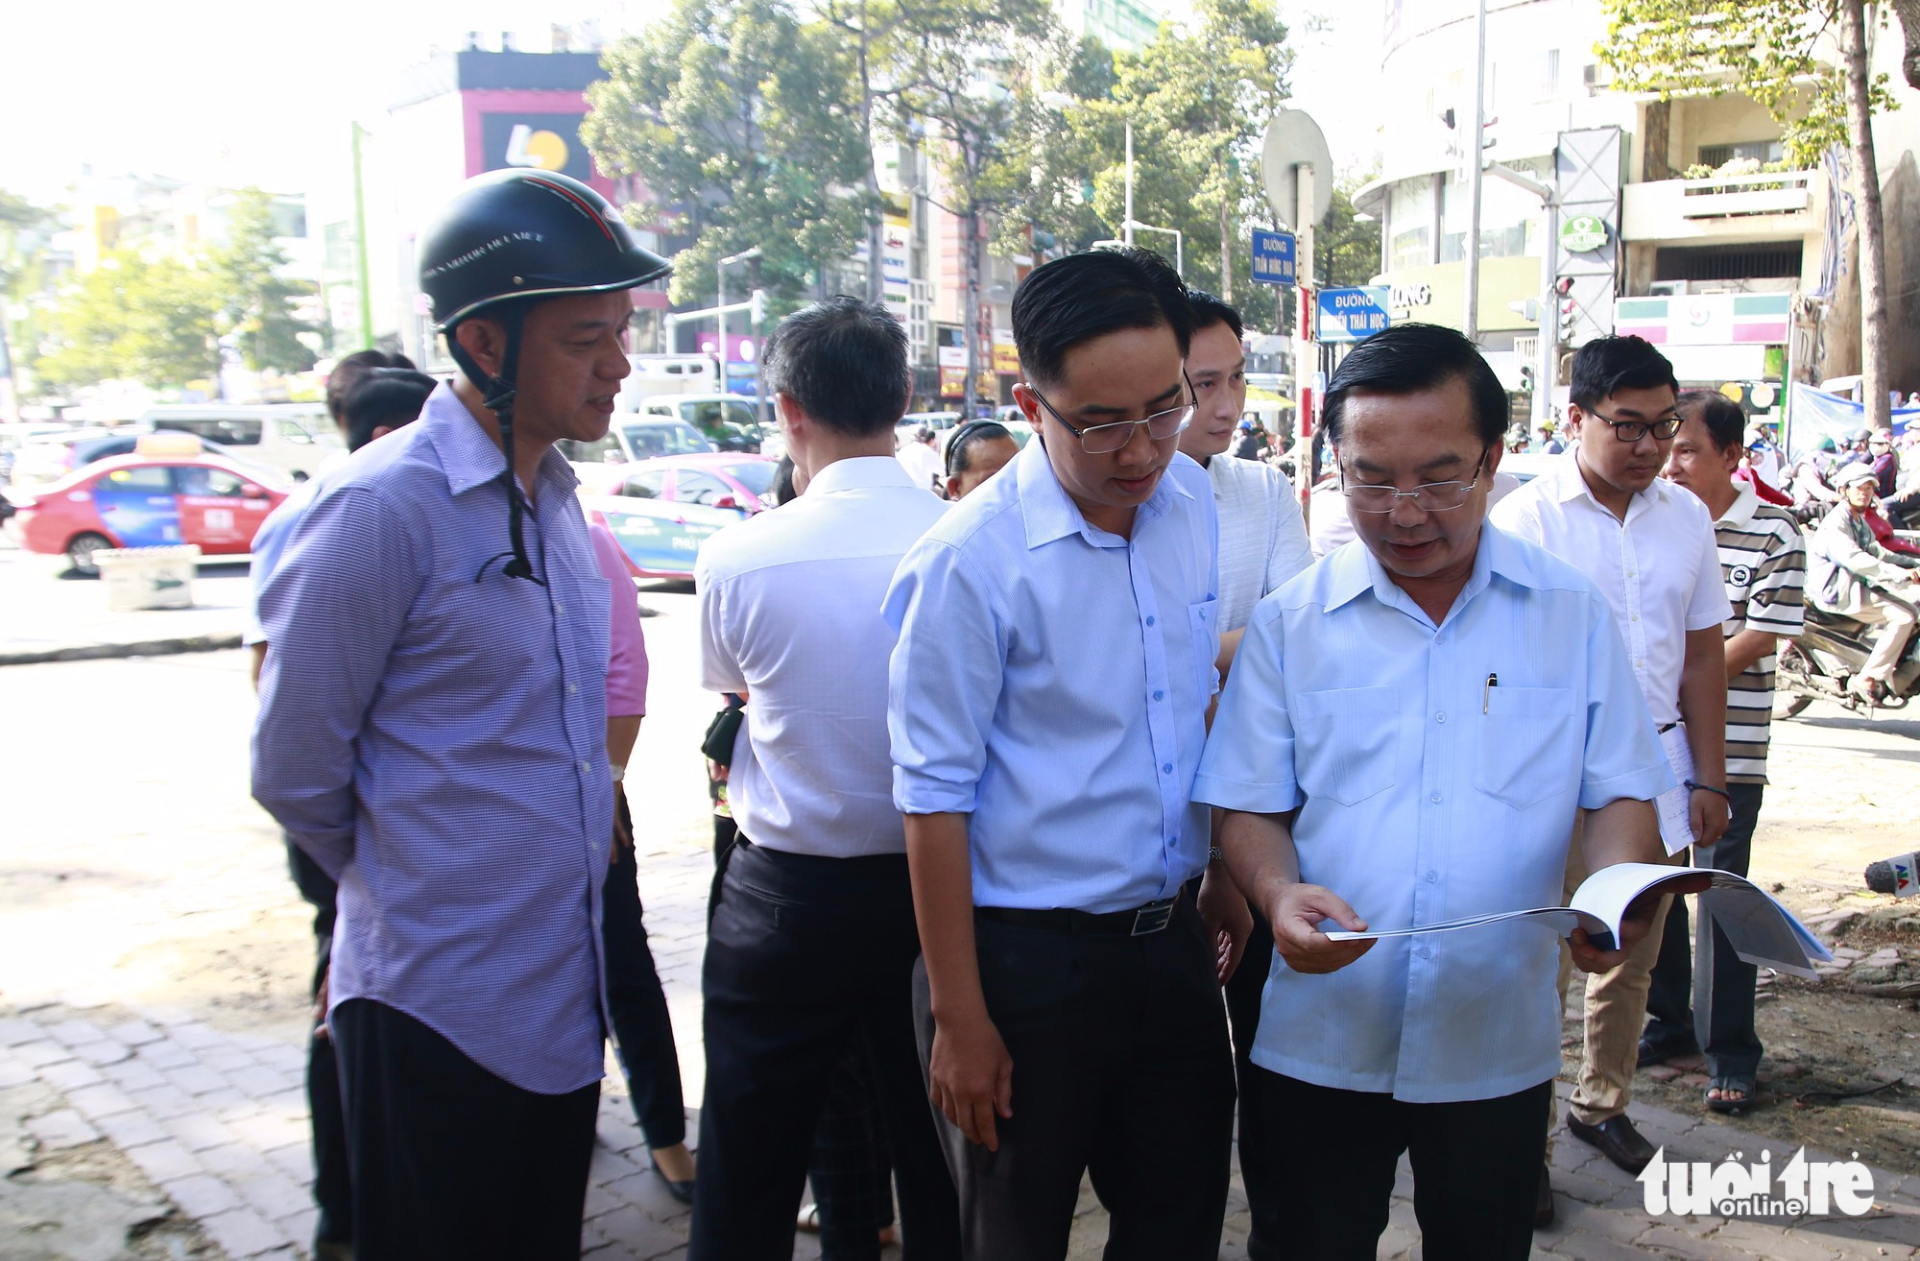 Nguyen The Thuan (R), chairman of the People’s Committee in District 1, Ho Chi Minh City, evaluates the situation on Nguyen Thai Hoc Street on November 21, 2017. Photo: Tuoi Tre